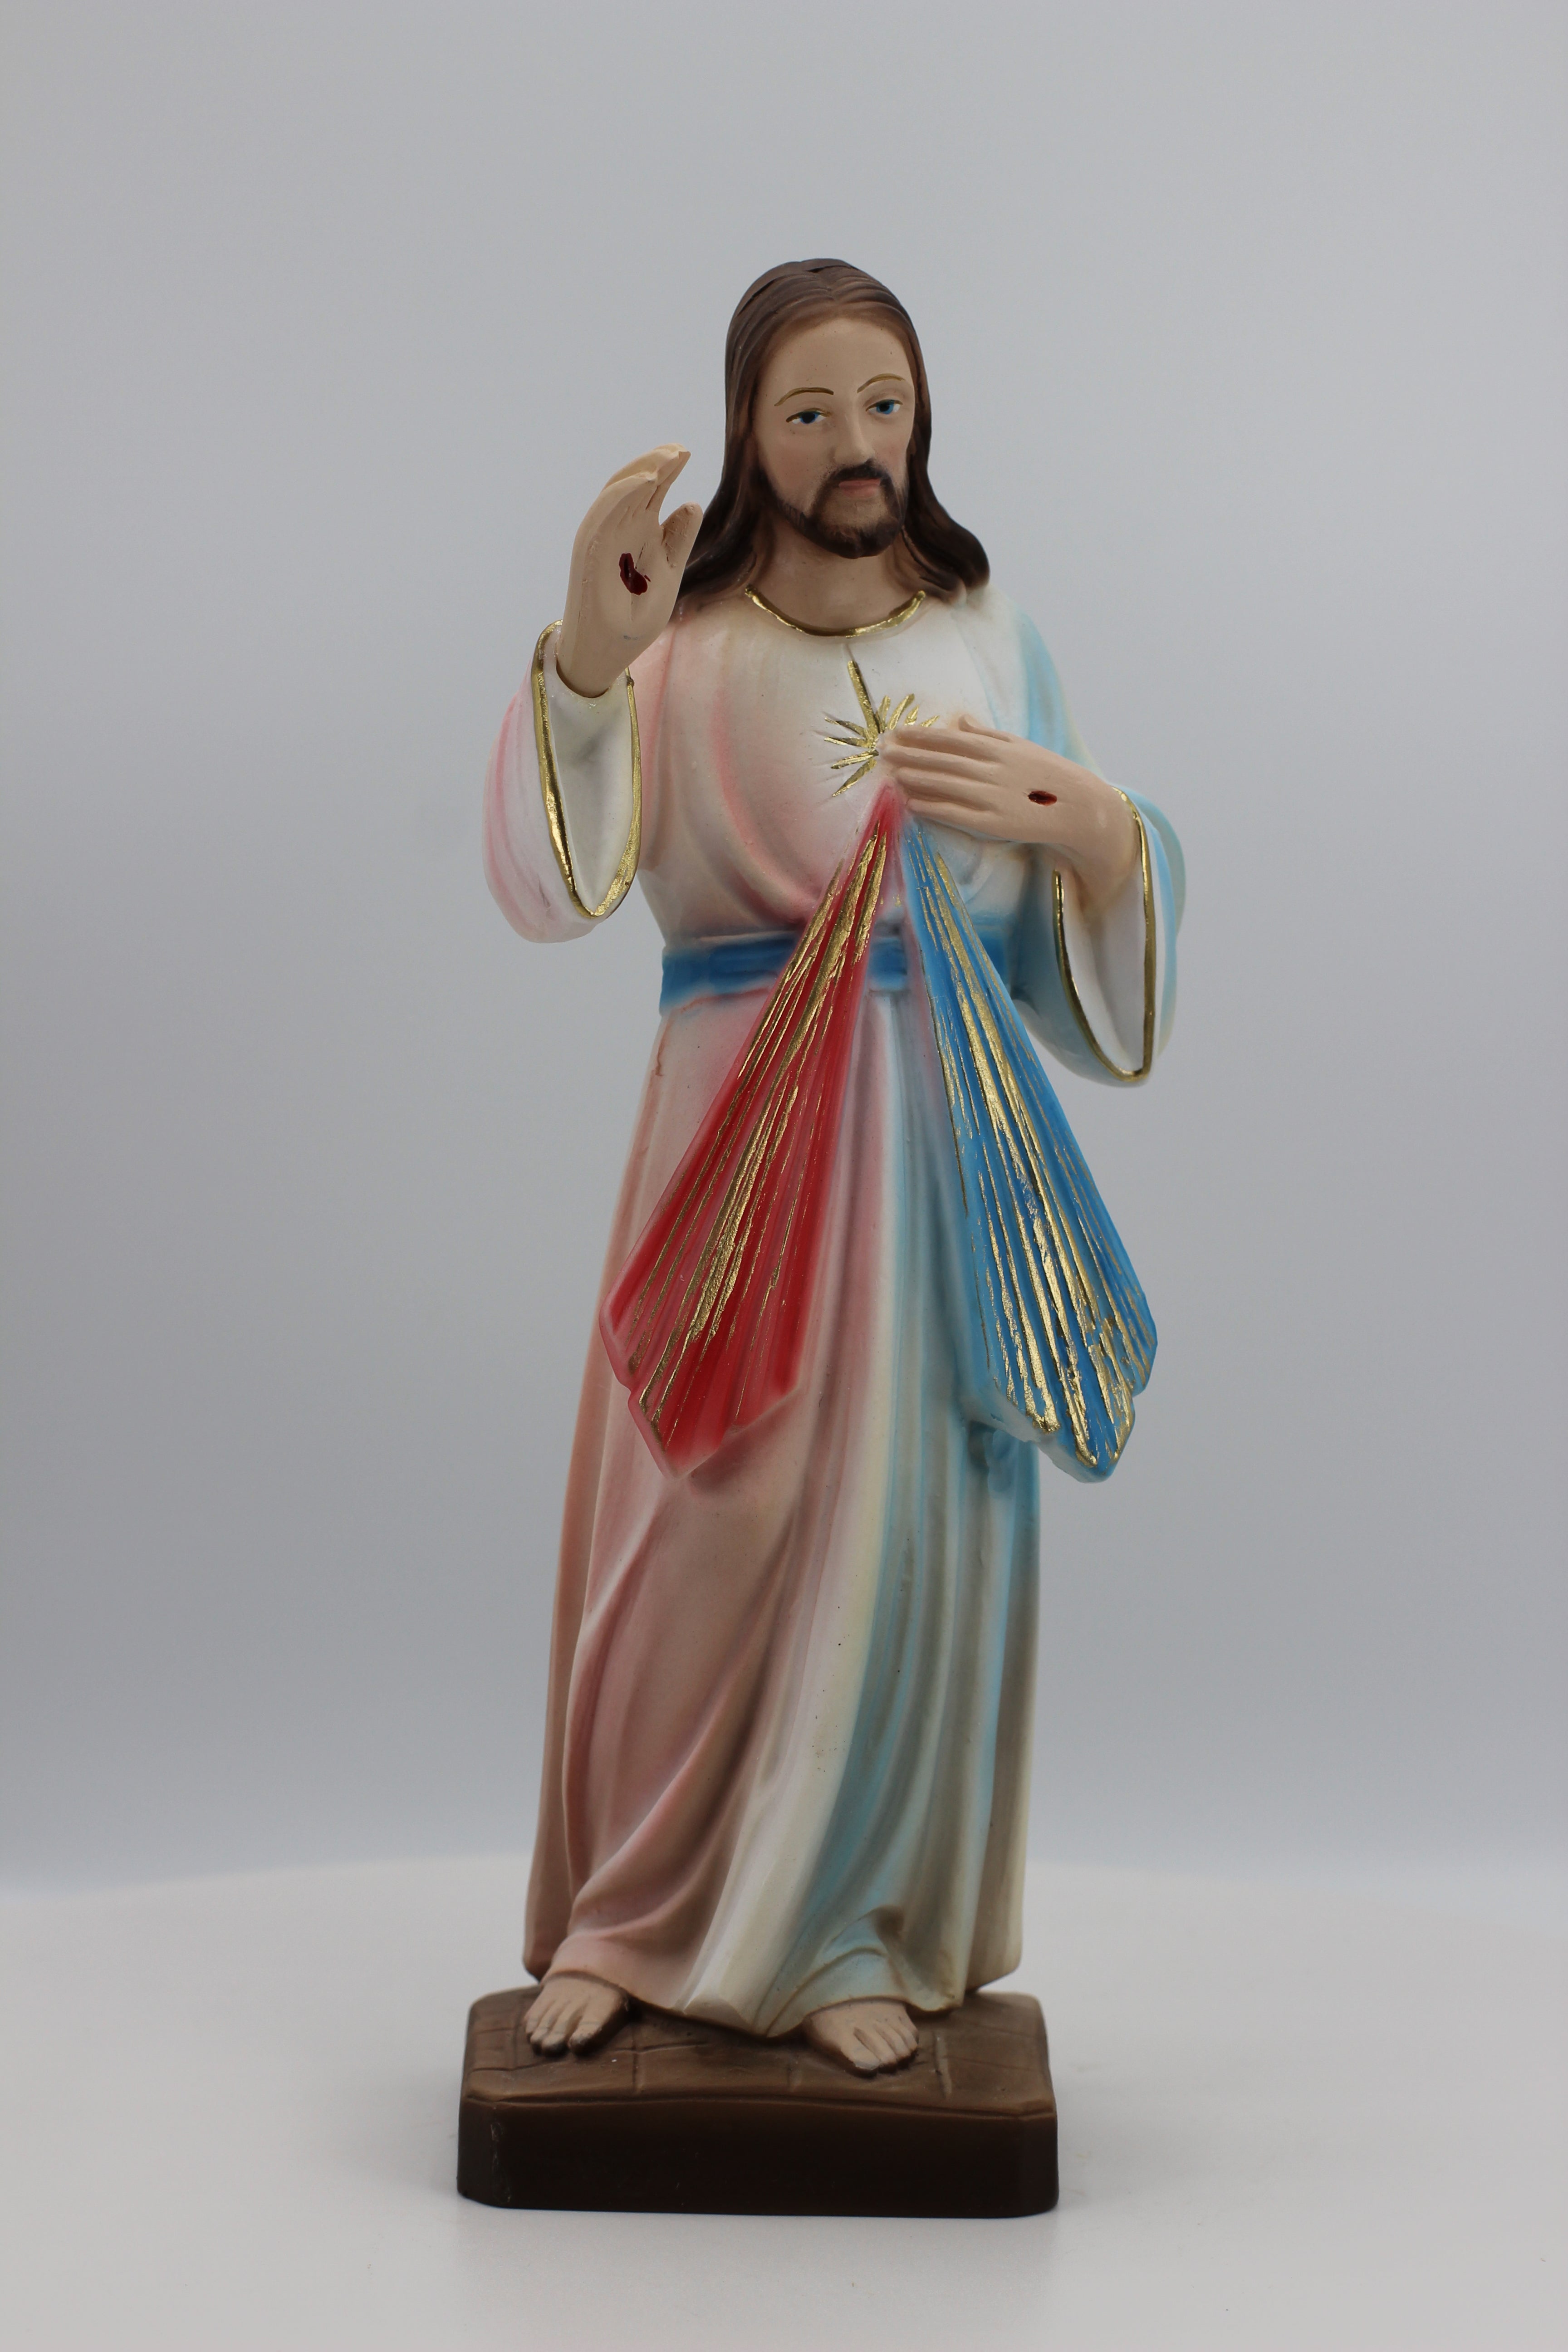 The Faith Gift Shop Divine Mercy statue- Hand Painted in Italy - Our Tuscany Collection- Imagen de la Divina Misericordia